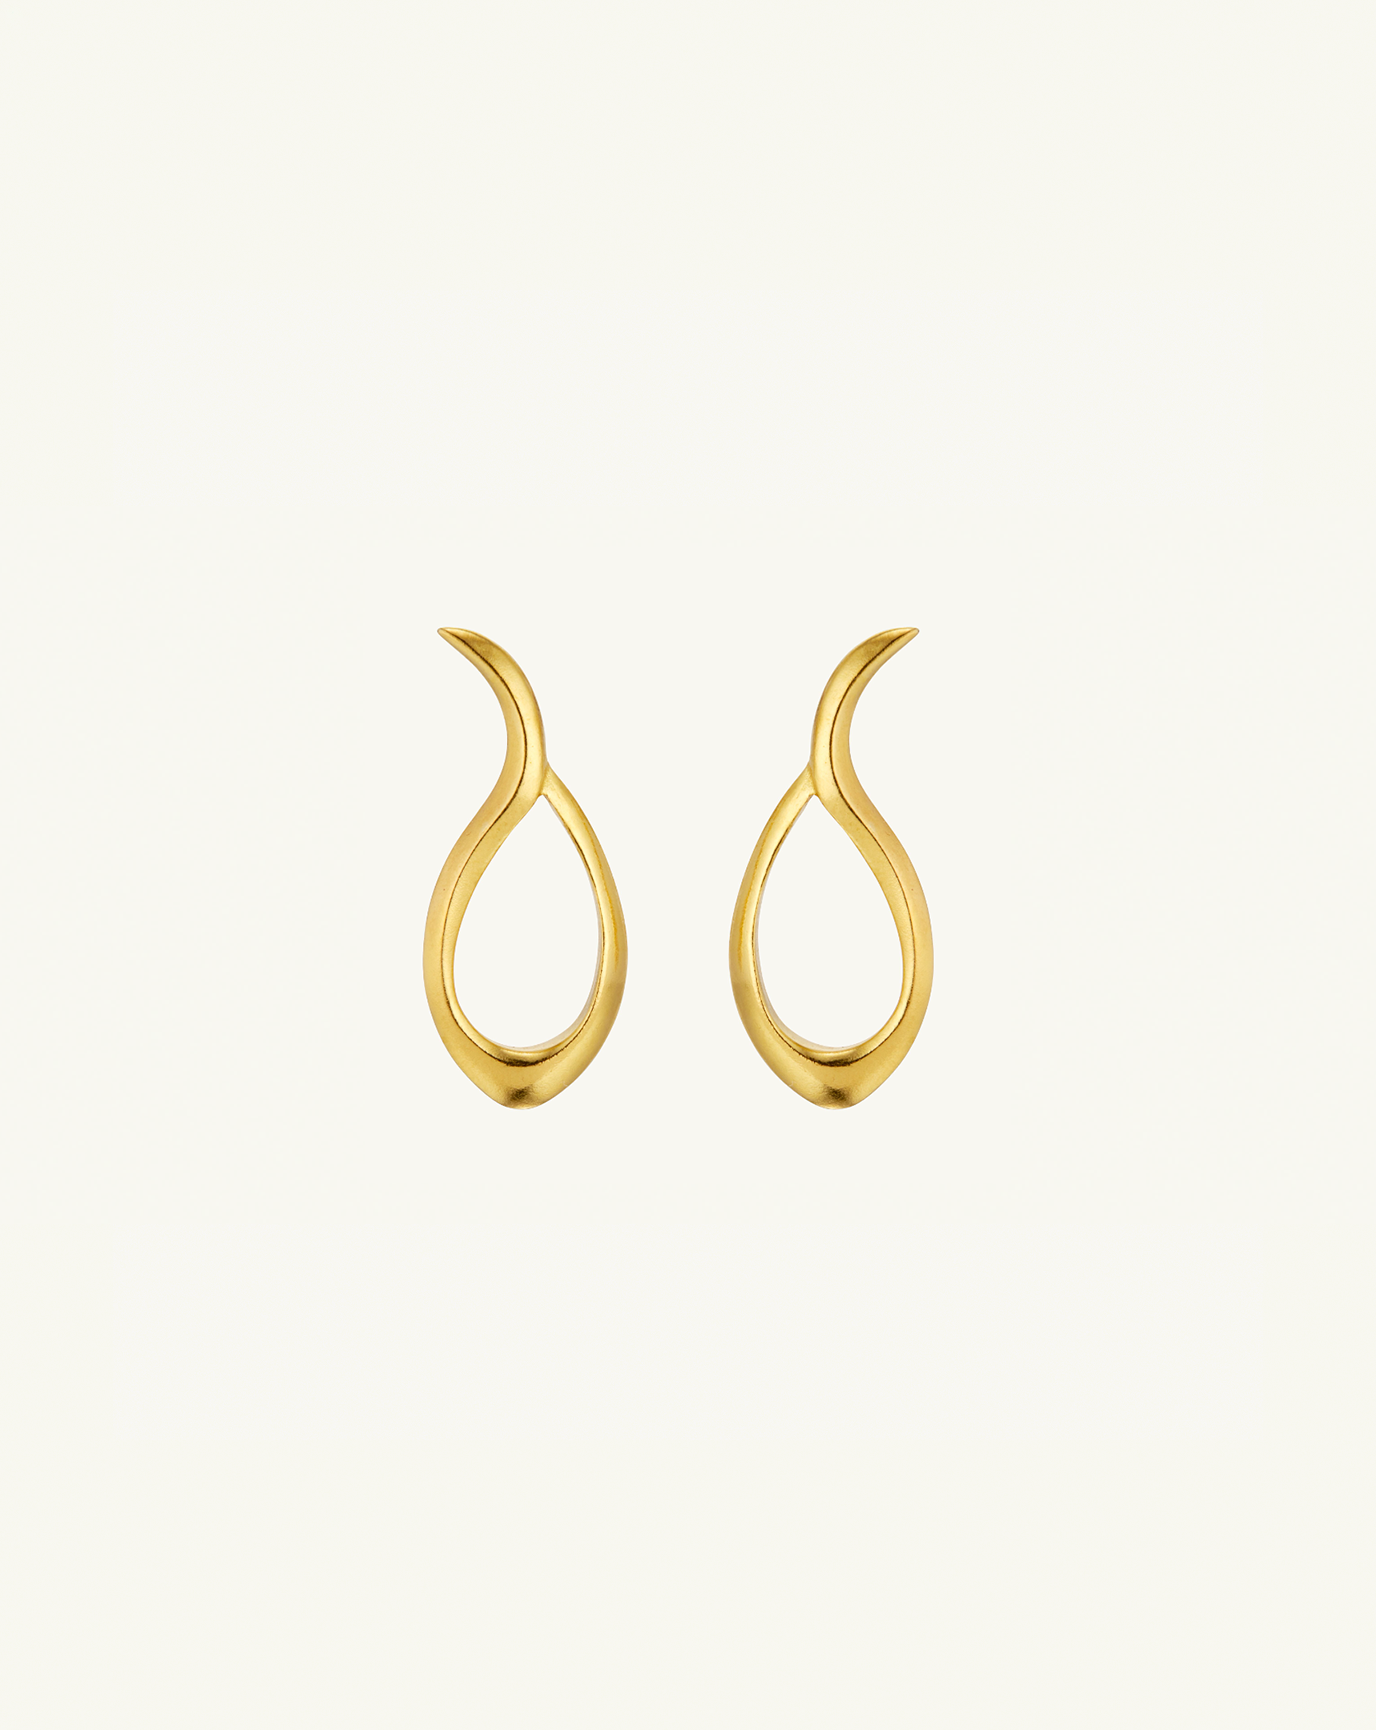 Product image of the small sculptural earrings